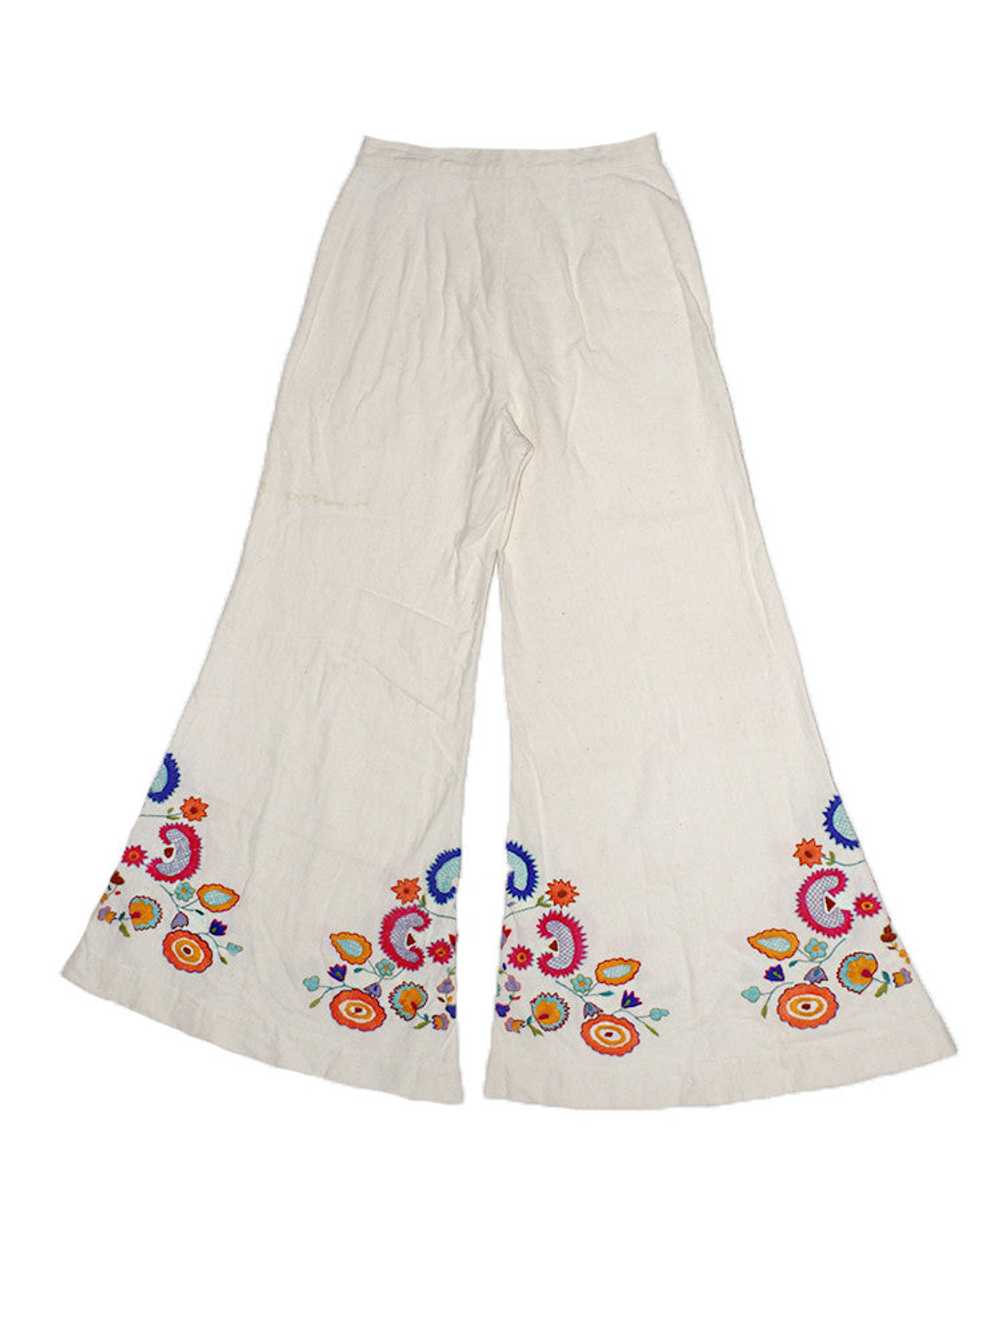 Vintage 70's Hand Embroidered Bell Bottoms - image 2